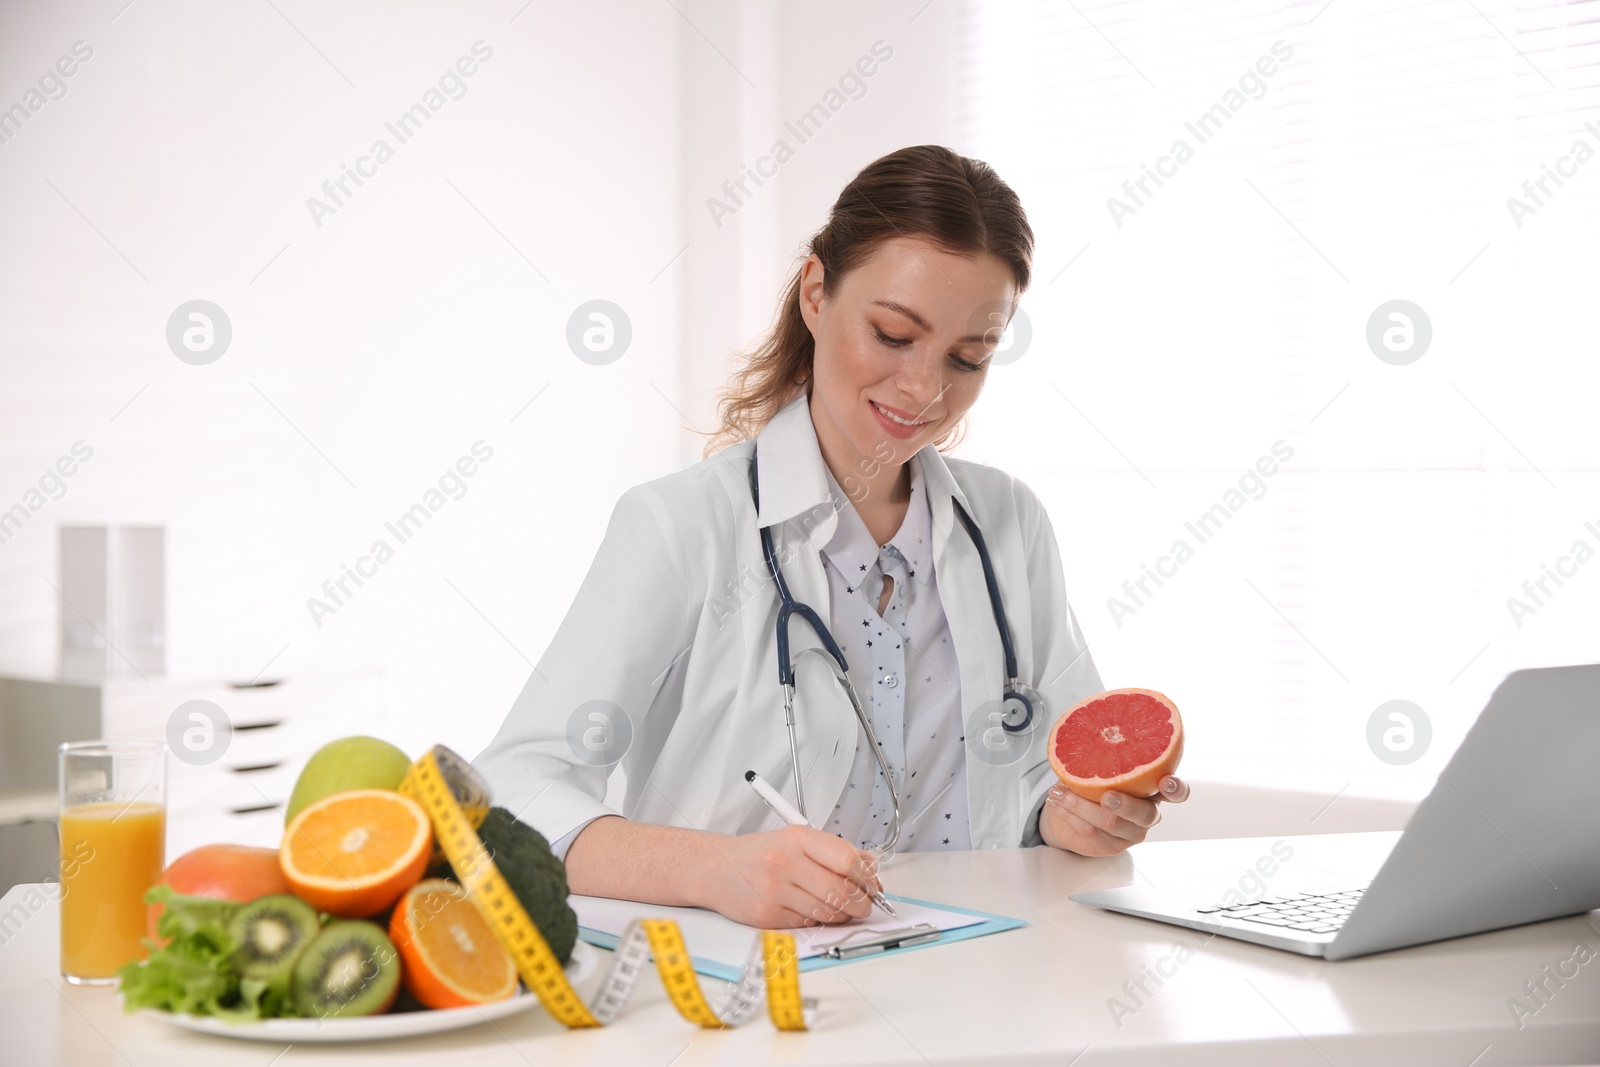 Photo of Female nutritionist working at desk in office